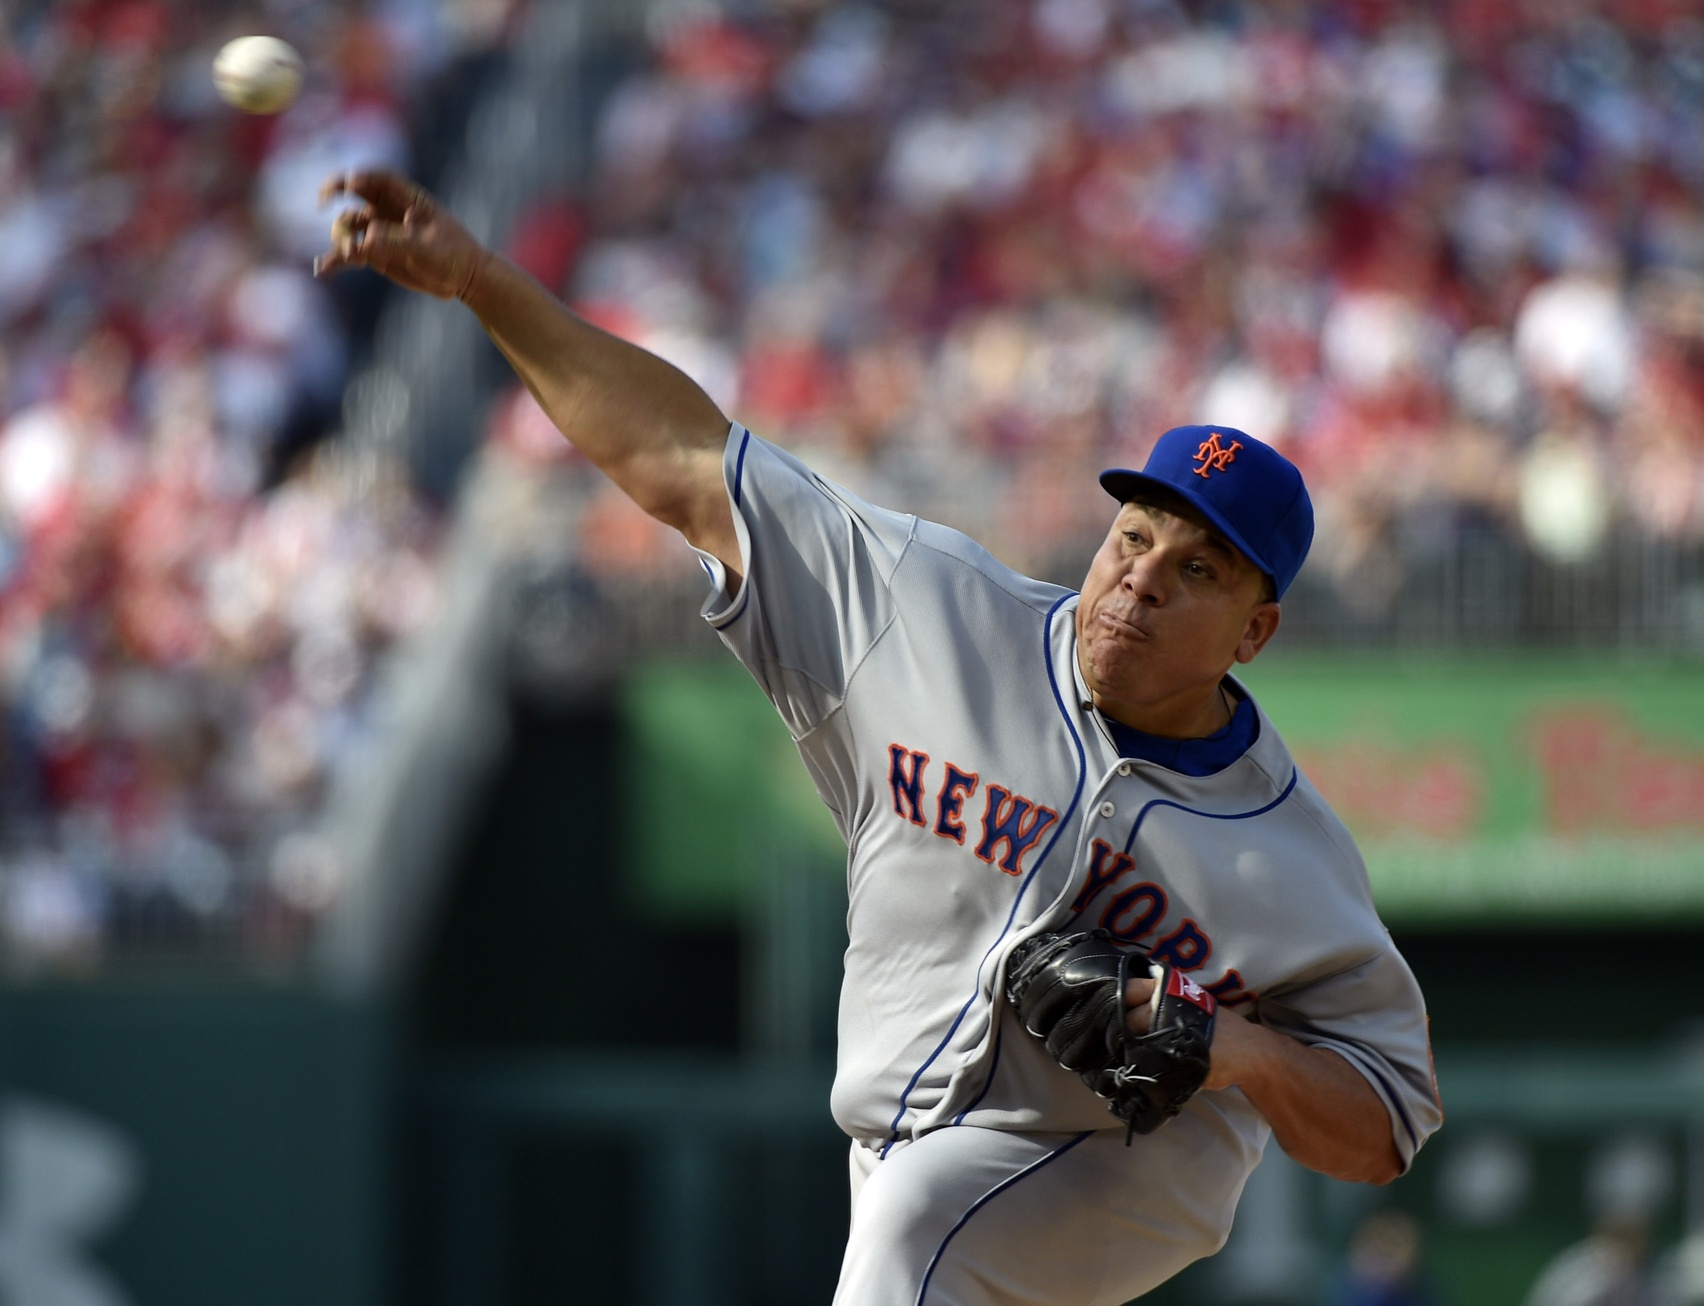 Bartolo Colon sets new career high in hits while pitching gem, is